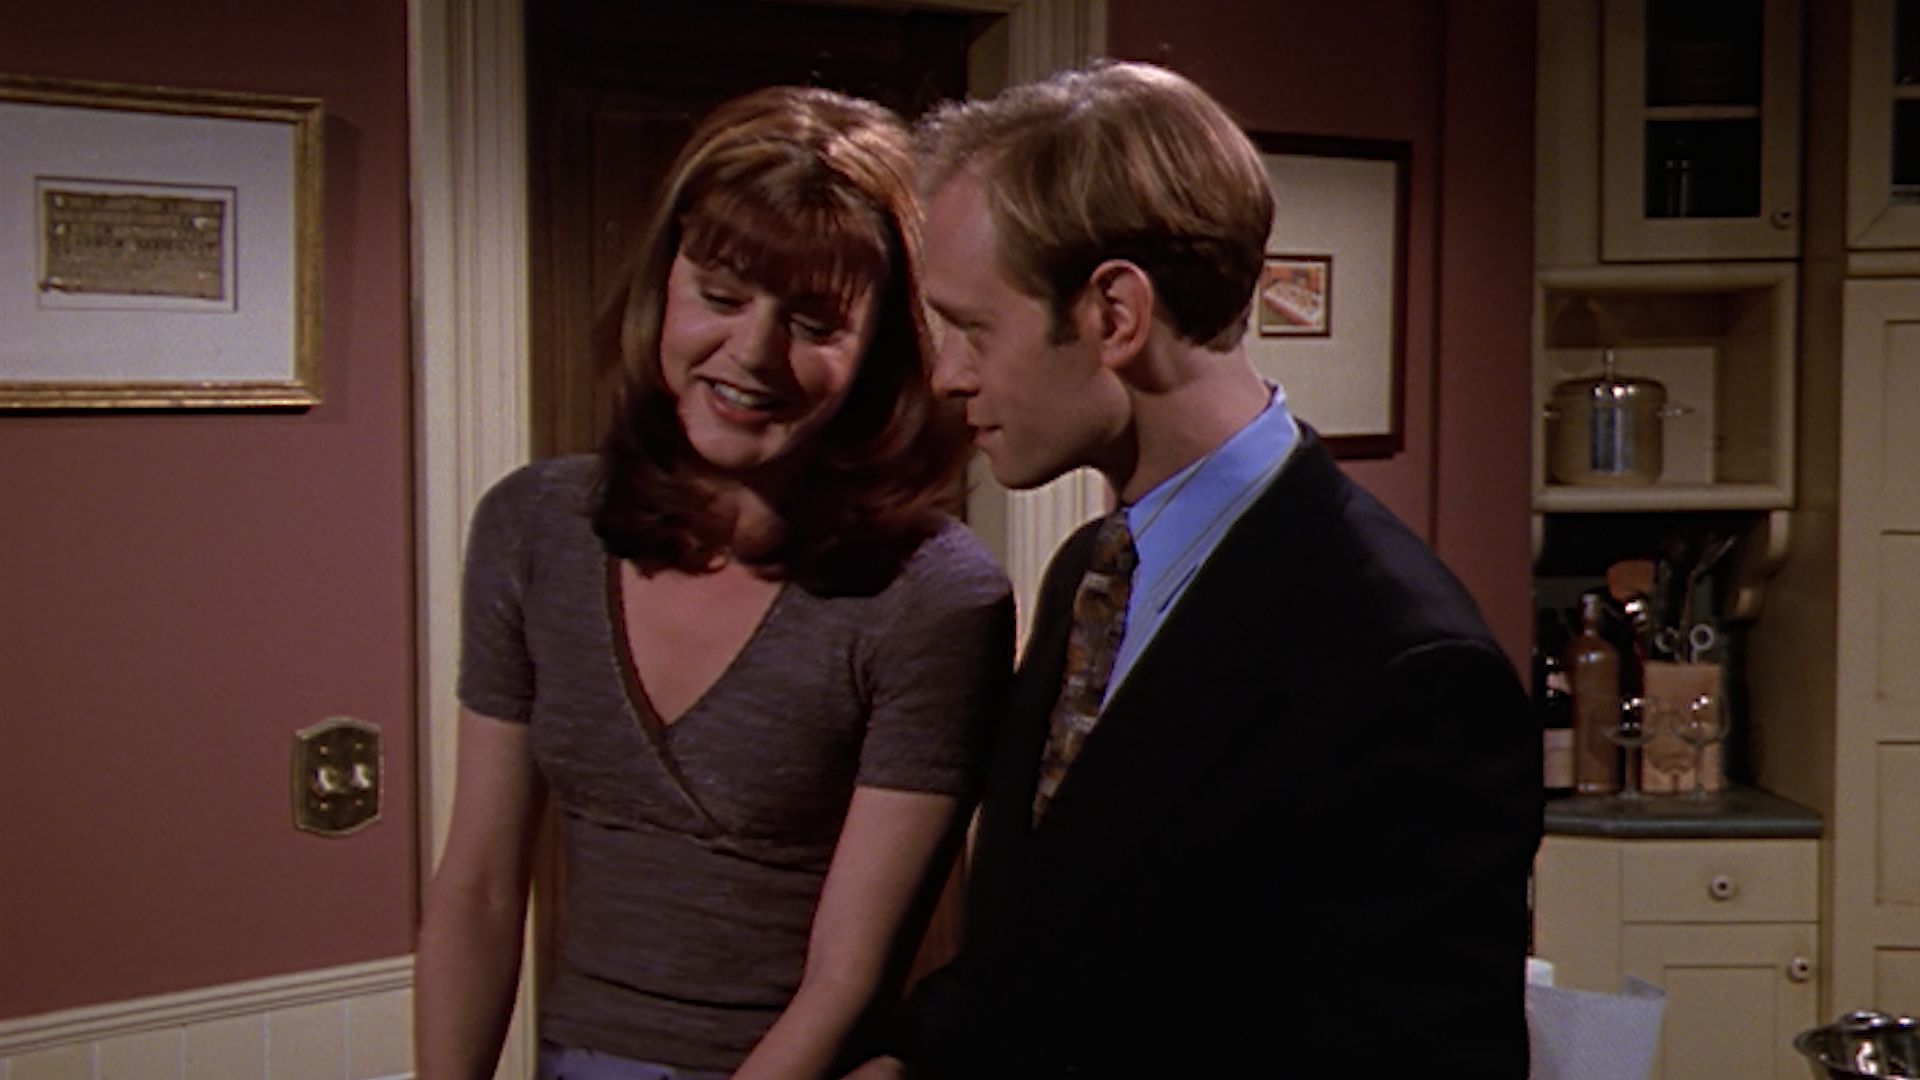 frasier - niles and daphne - david hyde pierce and jane leeves